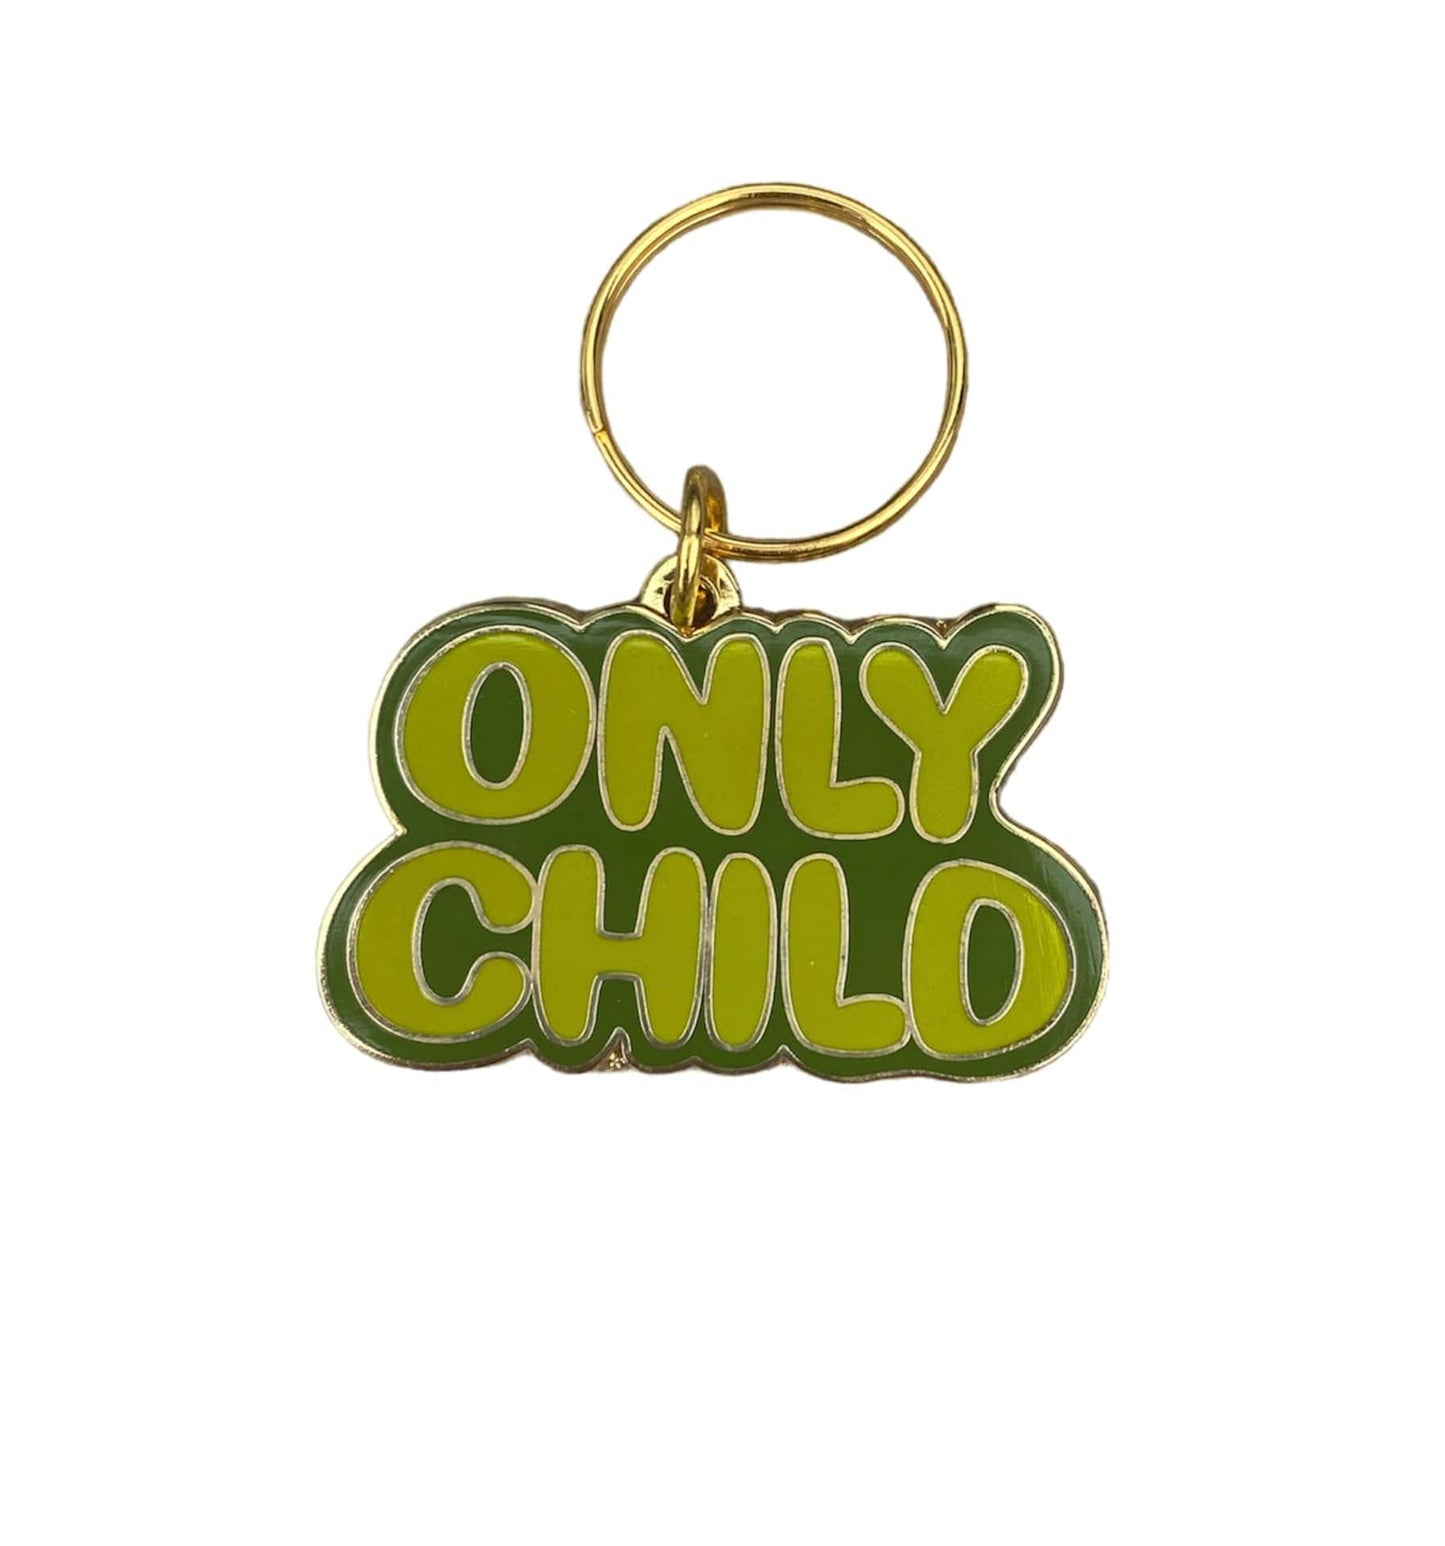 ID-tag Only Child